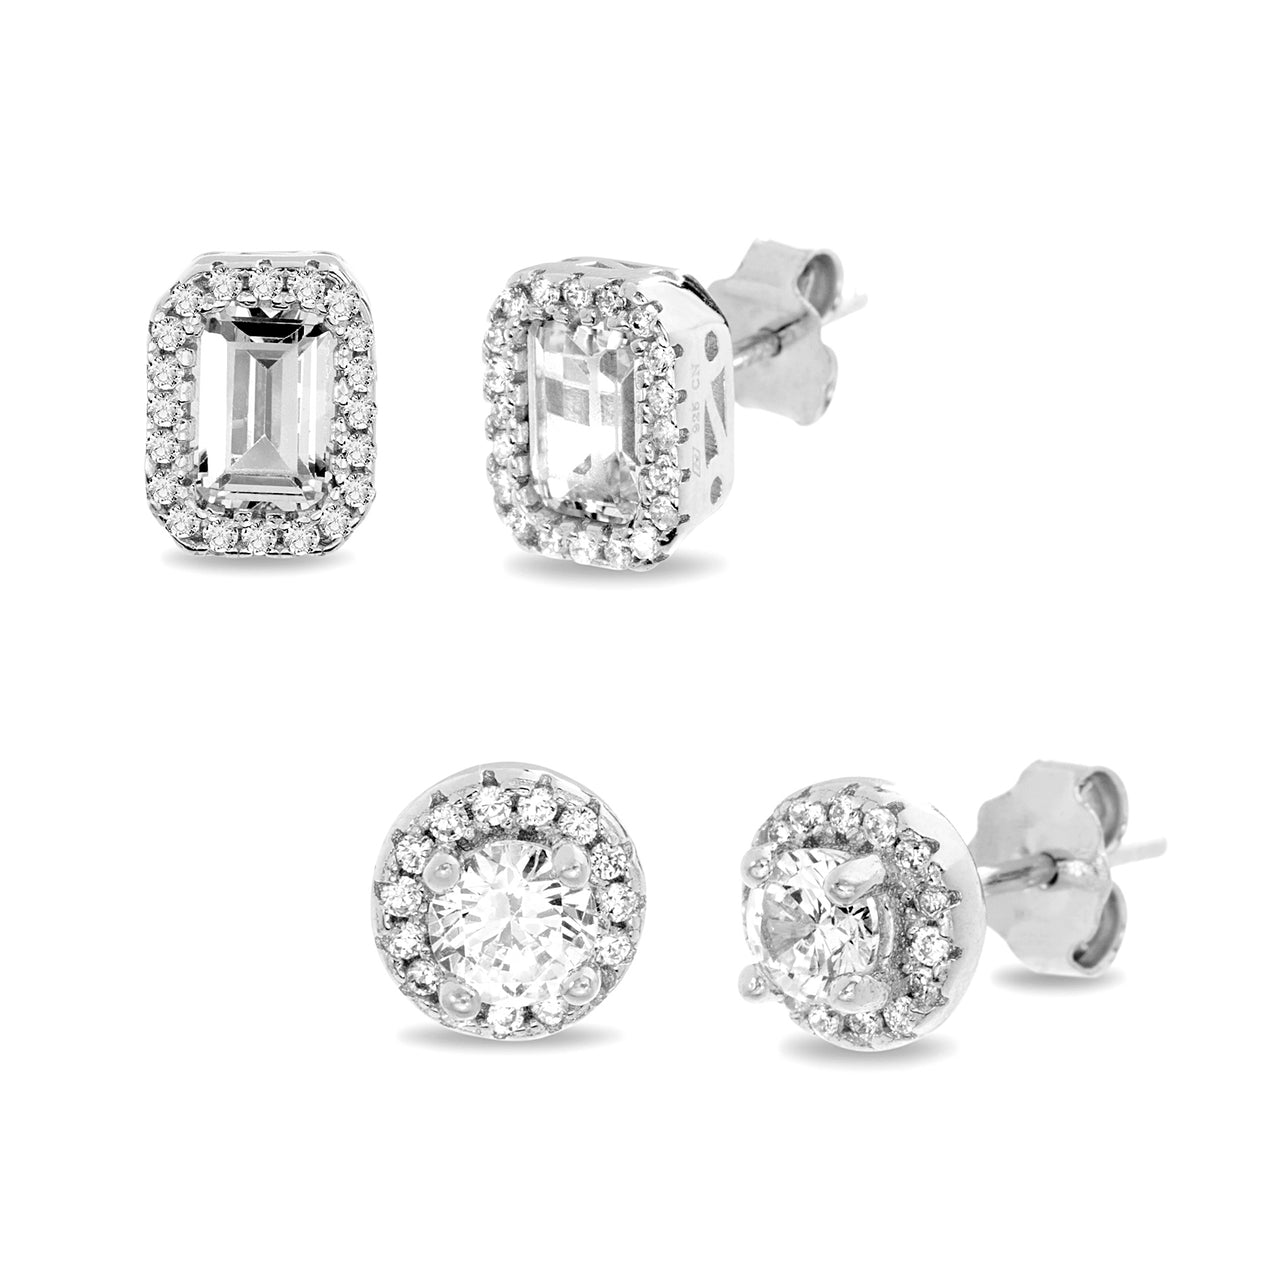  9mm Emerald and 7mm Round Cut Cubic Zirconia 2 Pair Bridal Gift Halo Stud Earring Set in Rhodium Plated 925 Sterling Silver